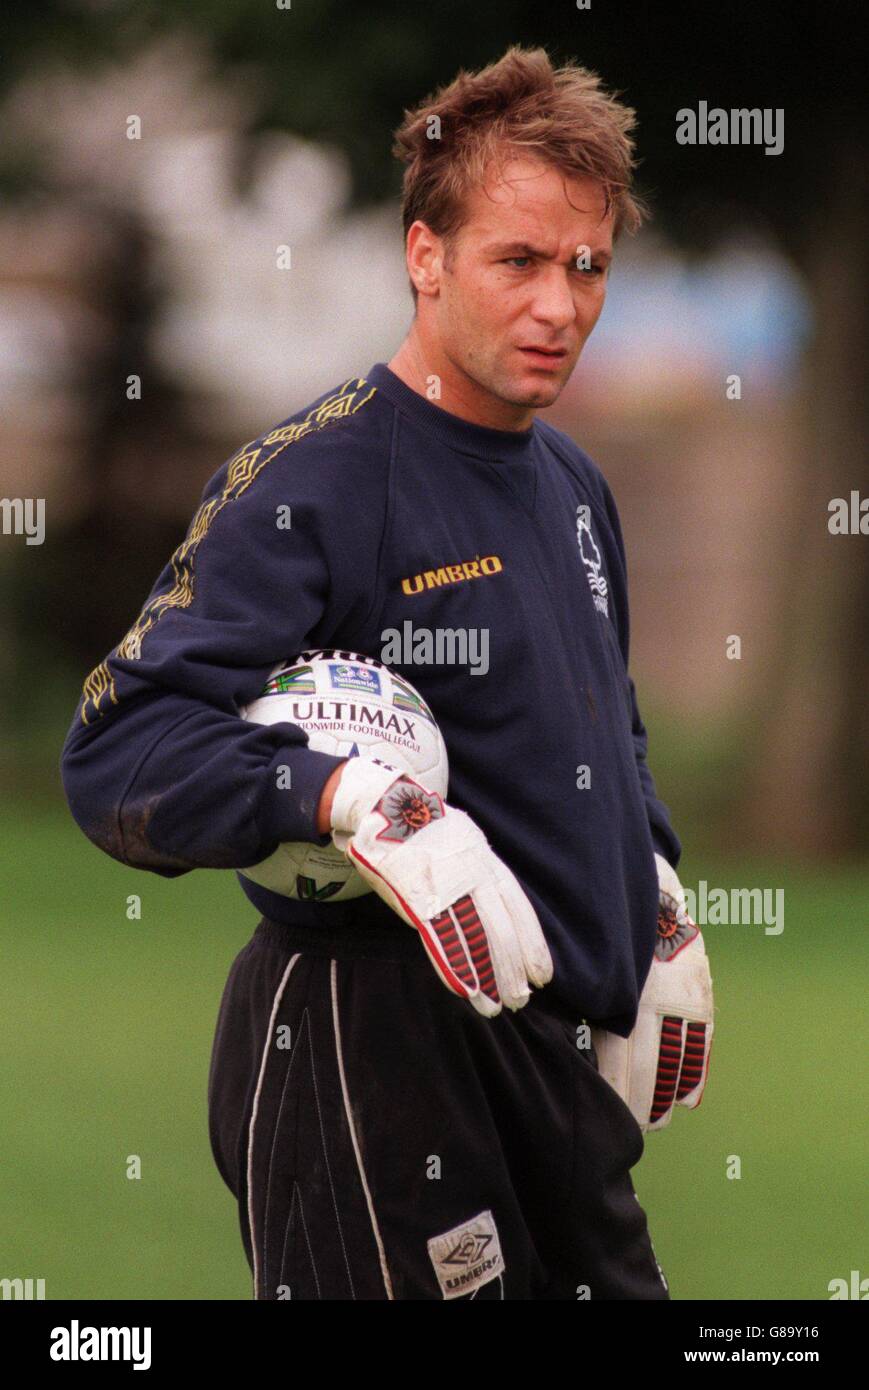 Soccer - Nottingham Forest Training. Marco Pascolo, the new Forest goalkeeper at pre-season training with Nottingham Forest Stock Photo